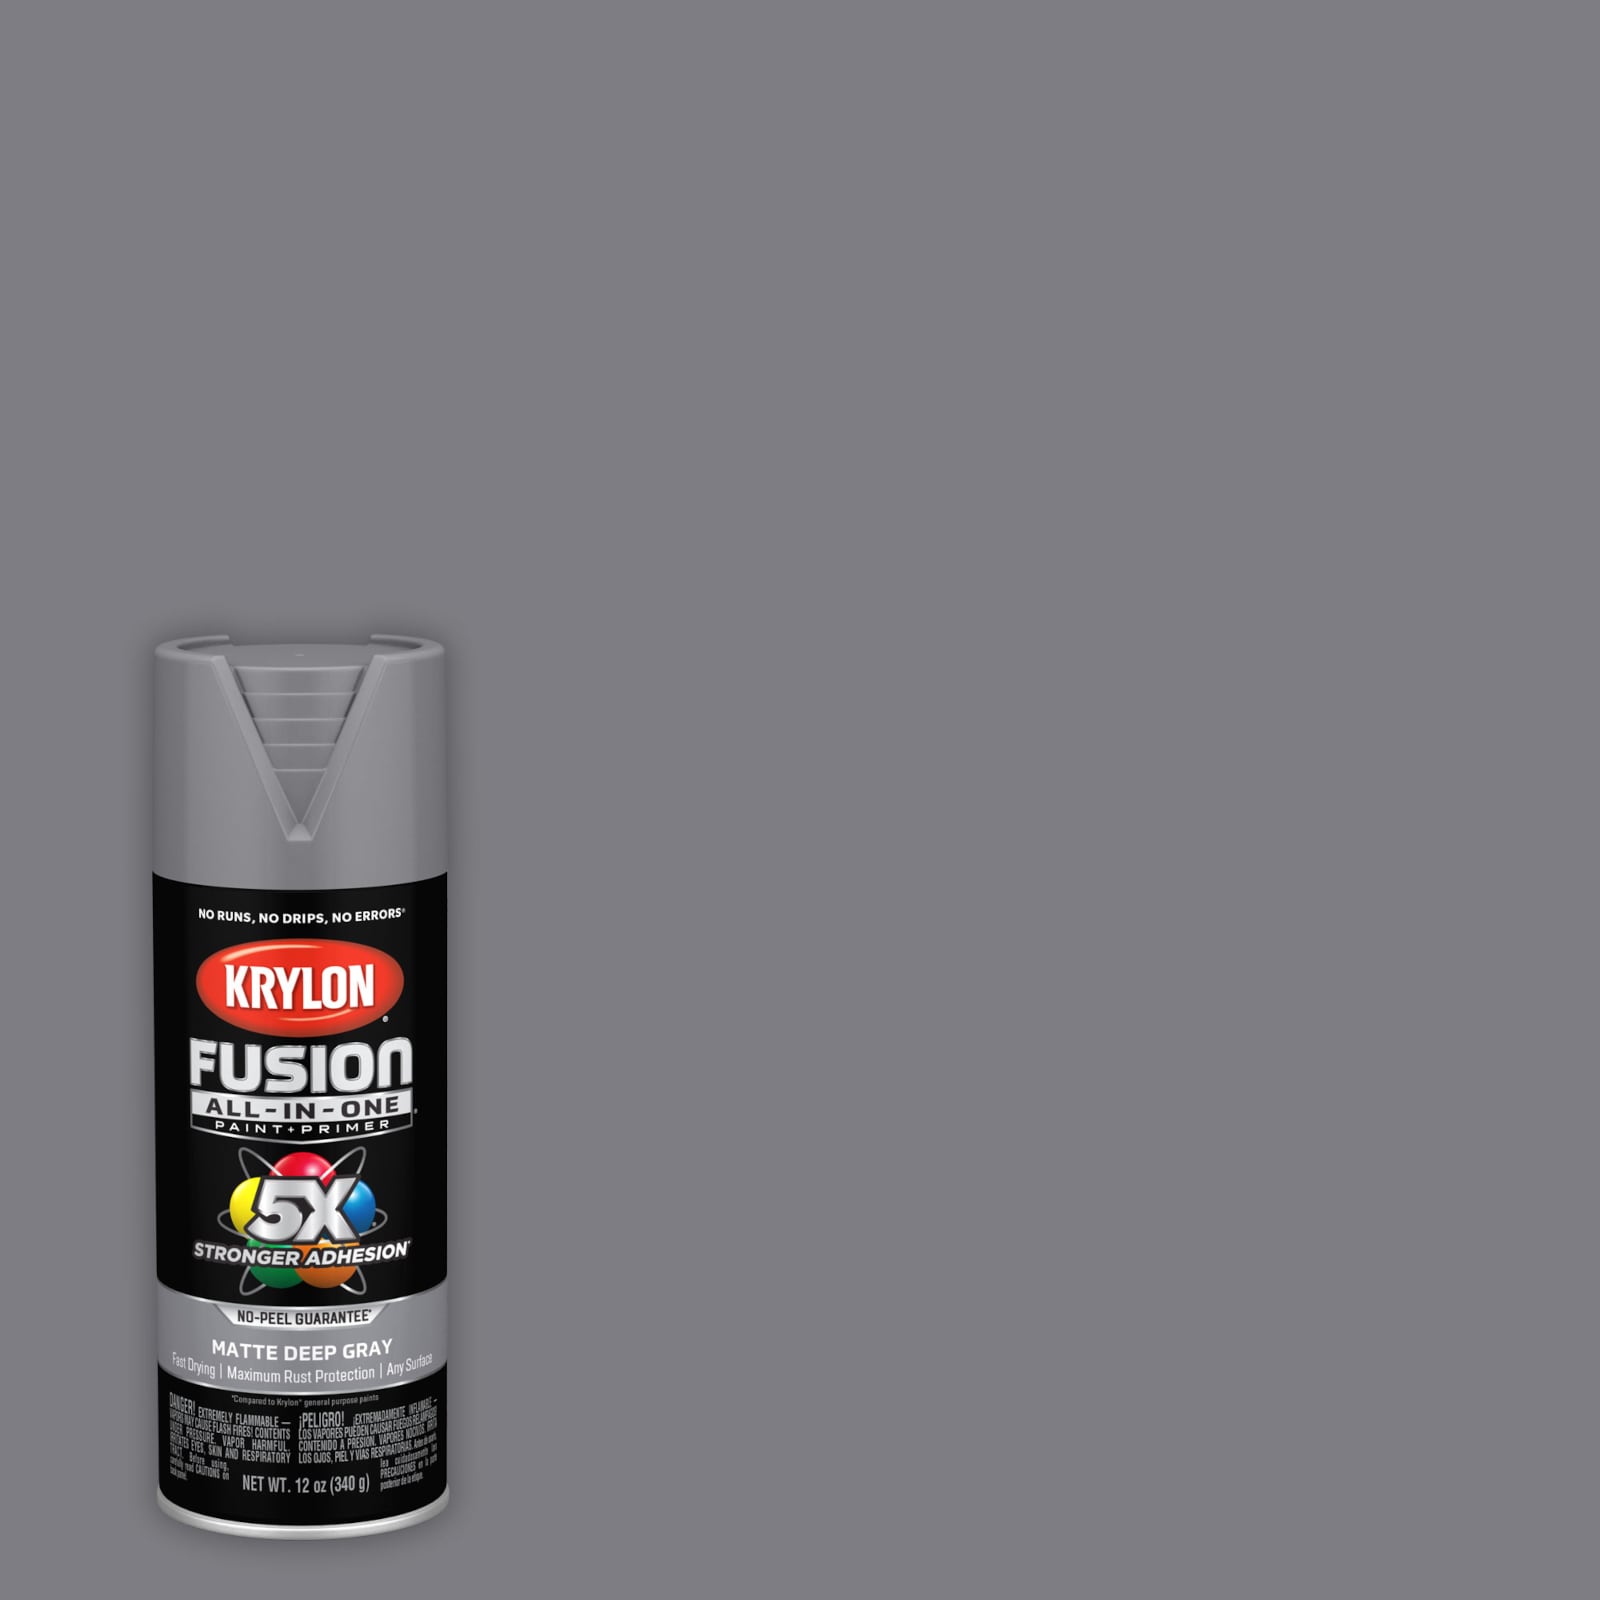 Cloverdale Paint 8474 Grey Ghost Precisely Matched For Paint and Spray Paint